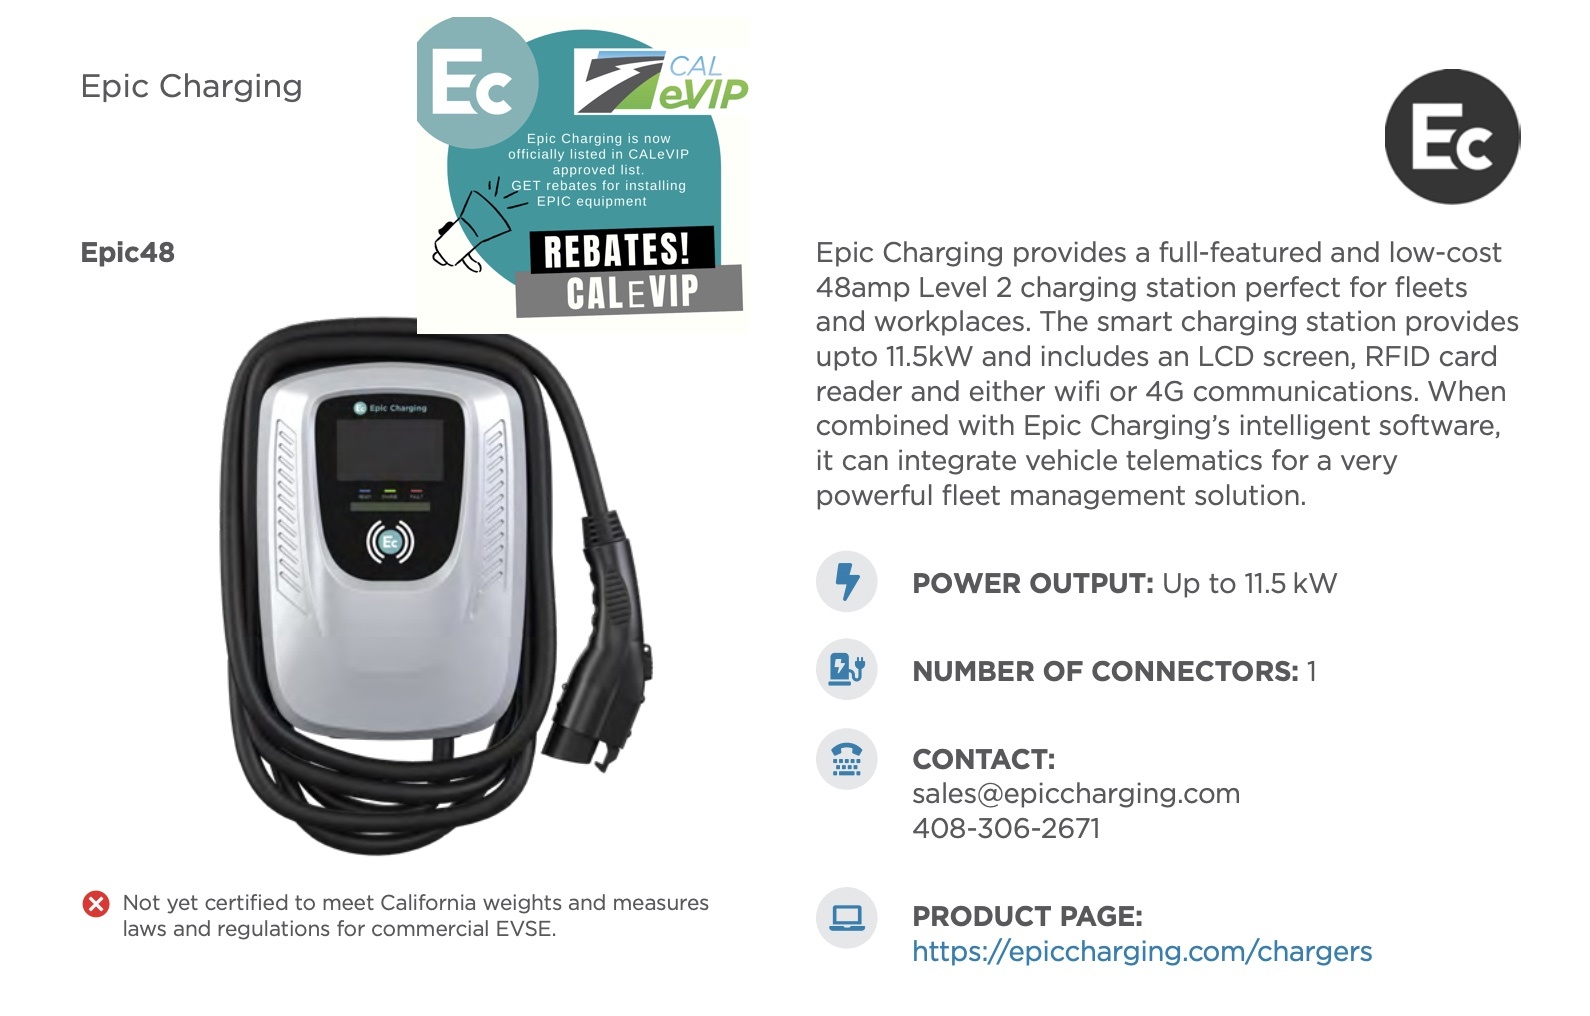 epic-charging-is-officially-listed-on-calevip-equipment-eligibility-list